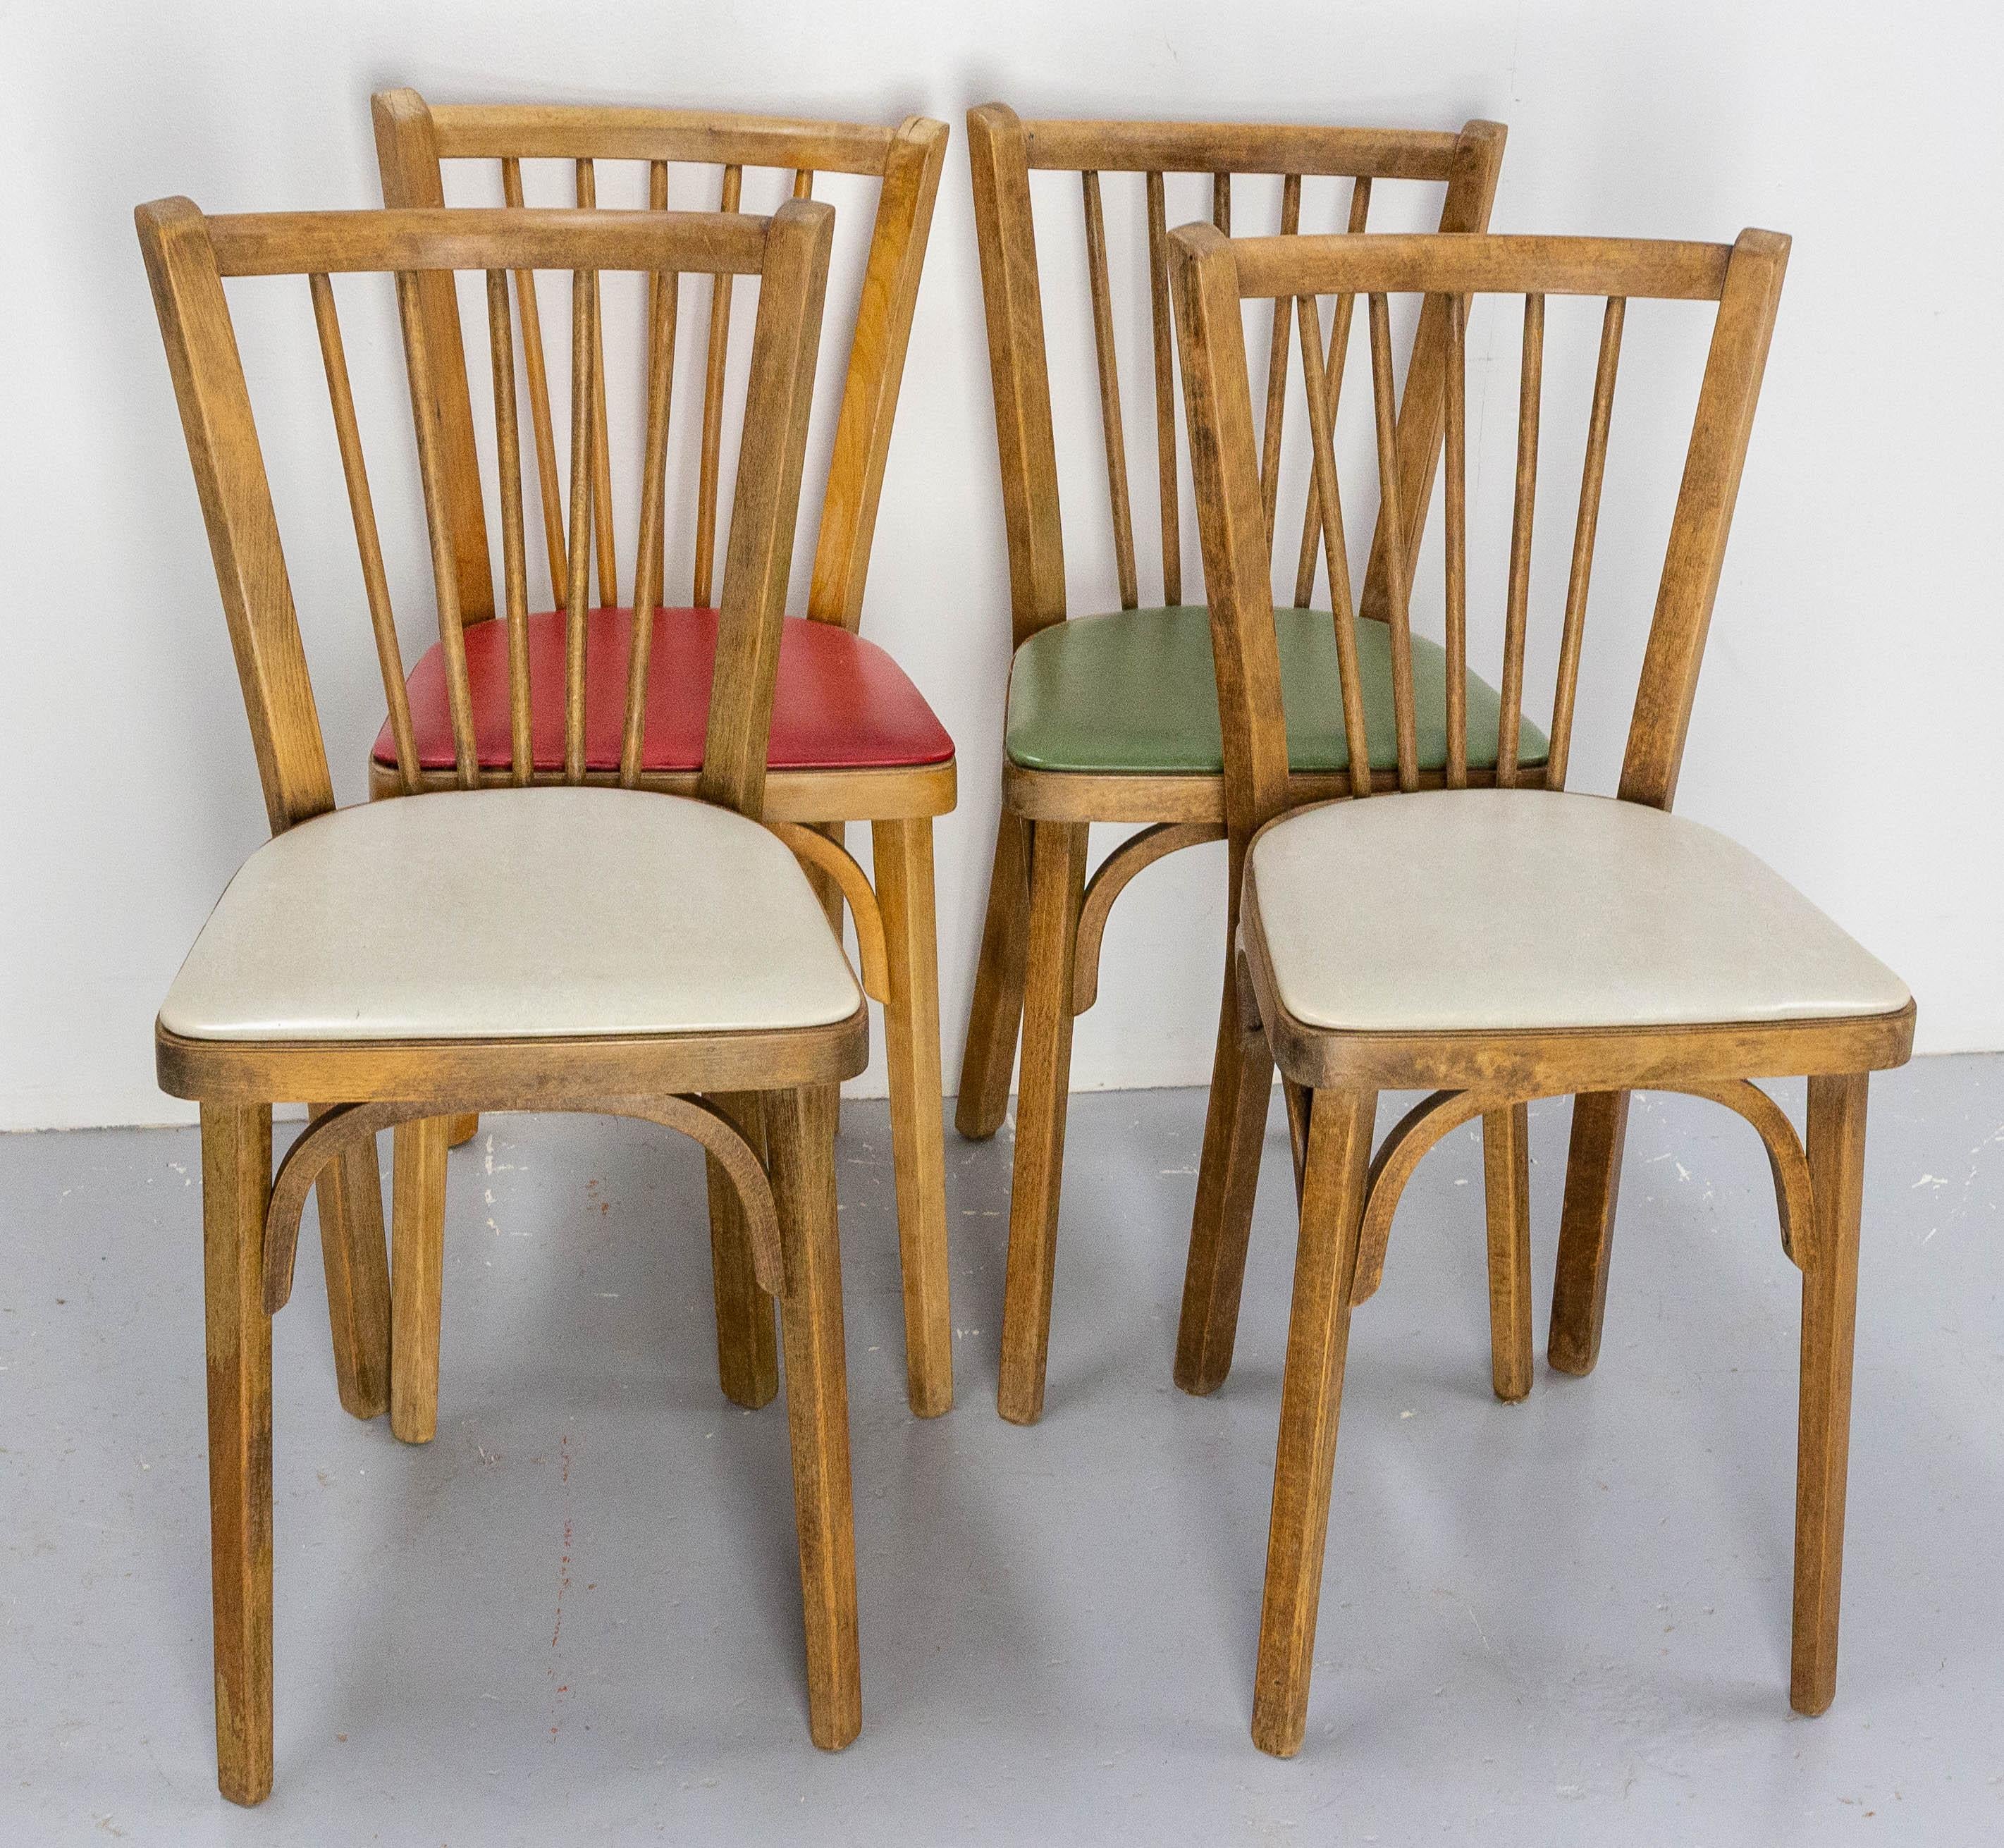 Four Bistro Dining Chairs Baumann Beech and Skai France Midcentury, circa 1950 For Sale 6